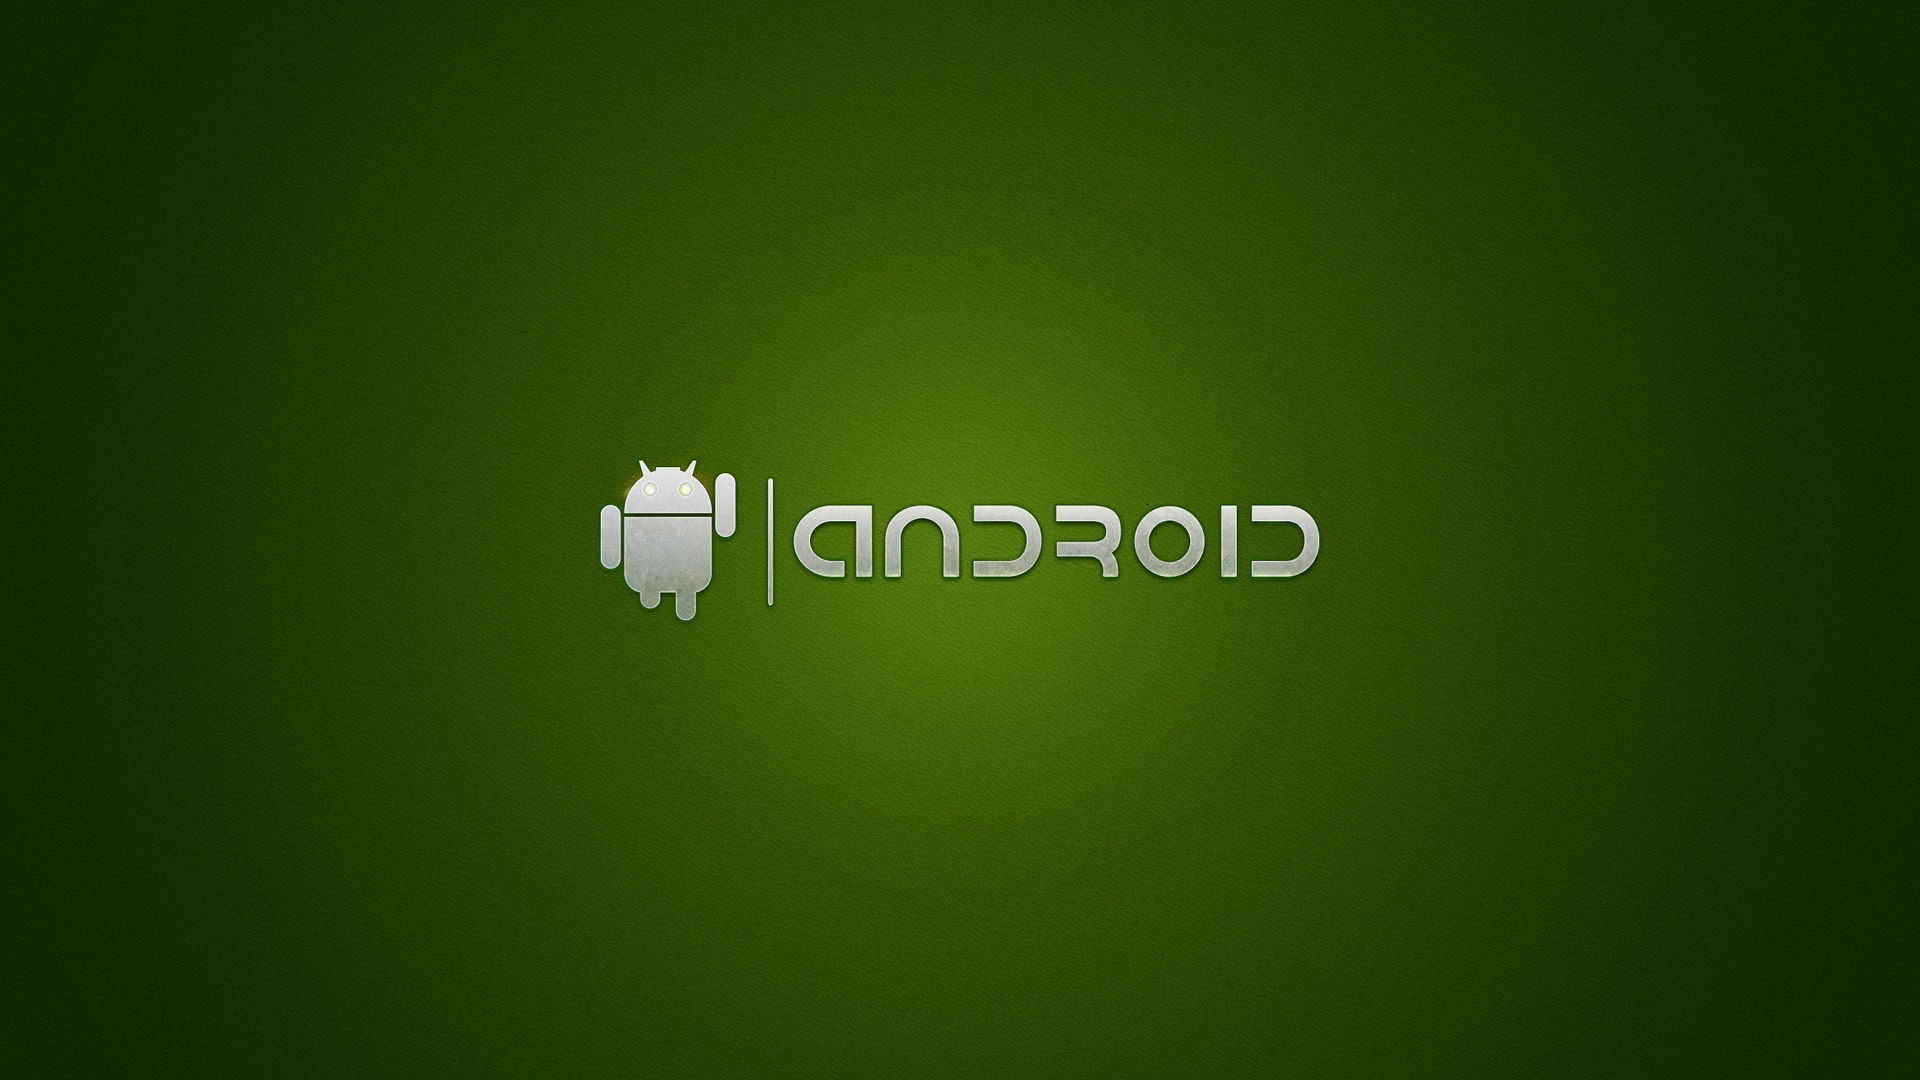 Download High Quality Android Wallpapers   Desktop